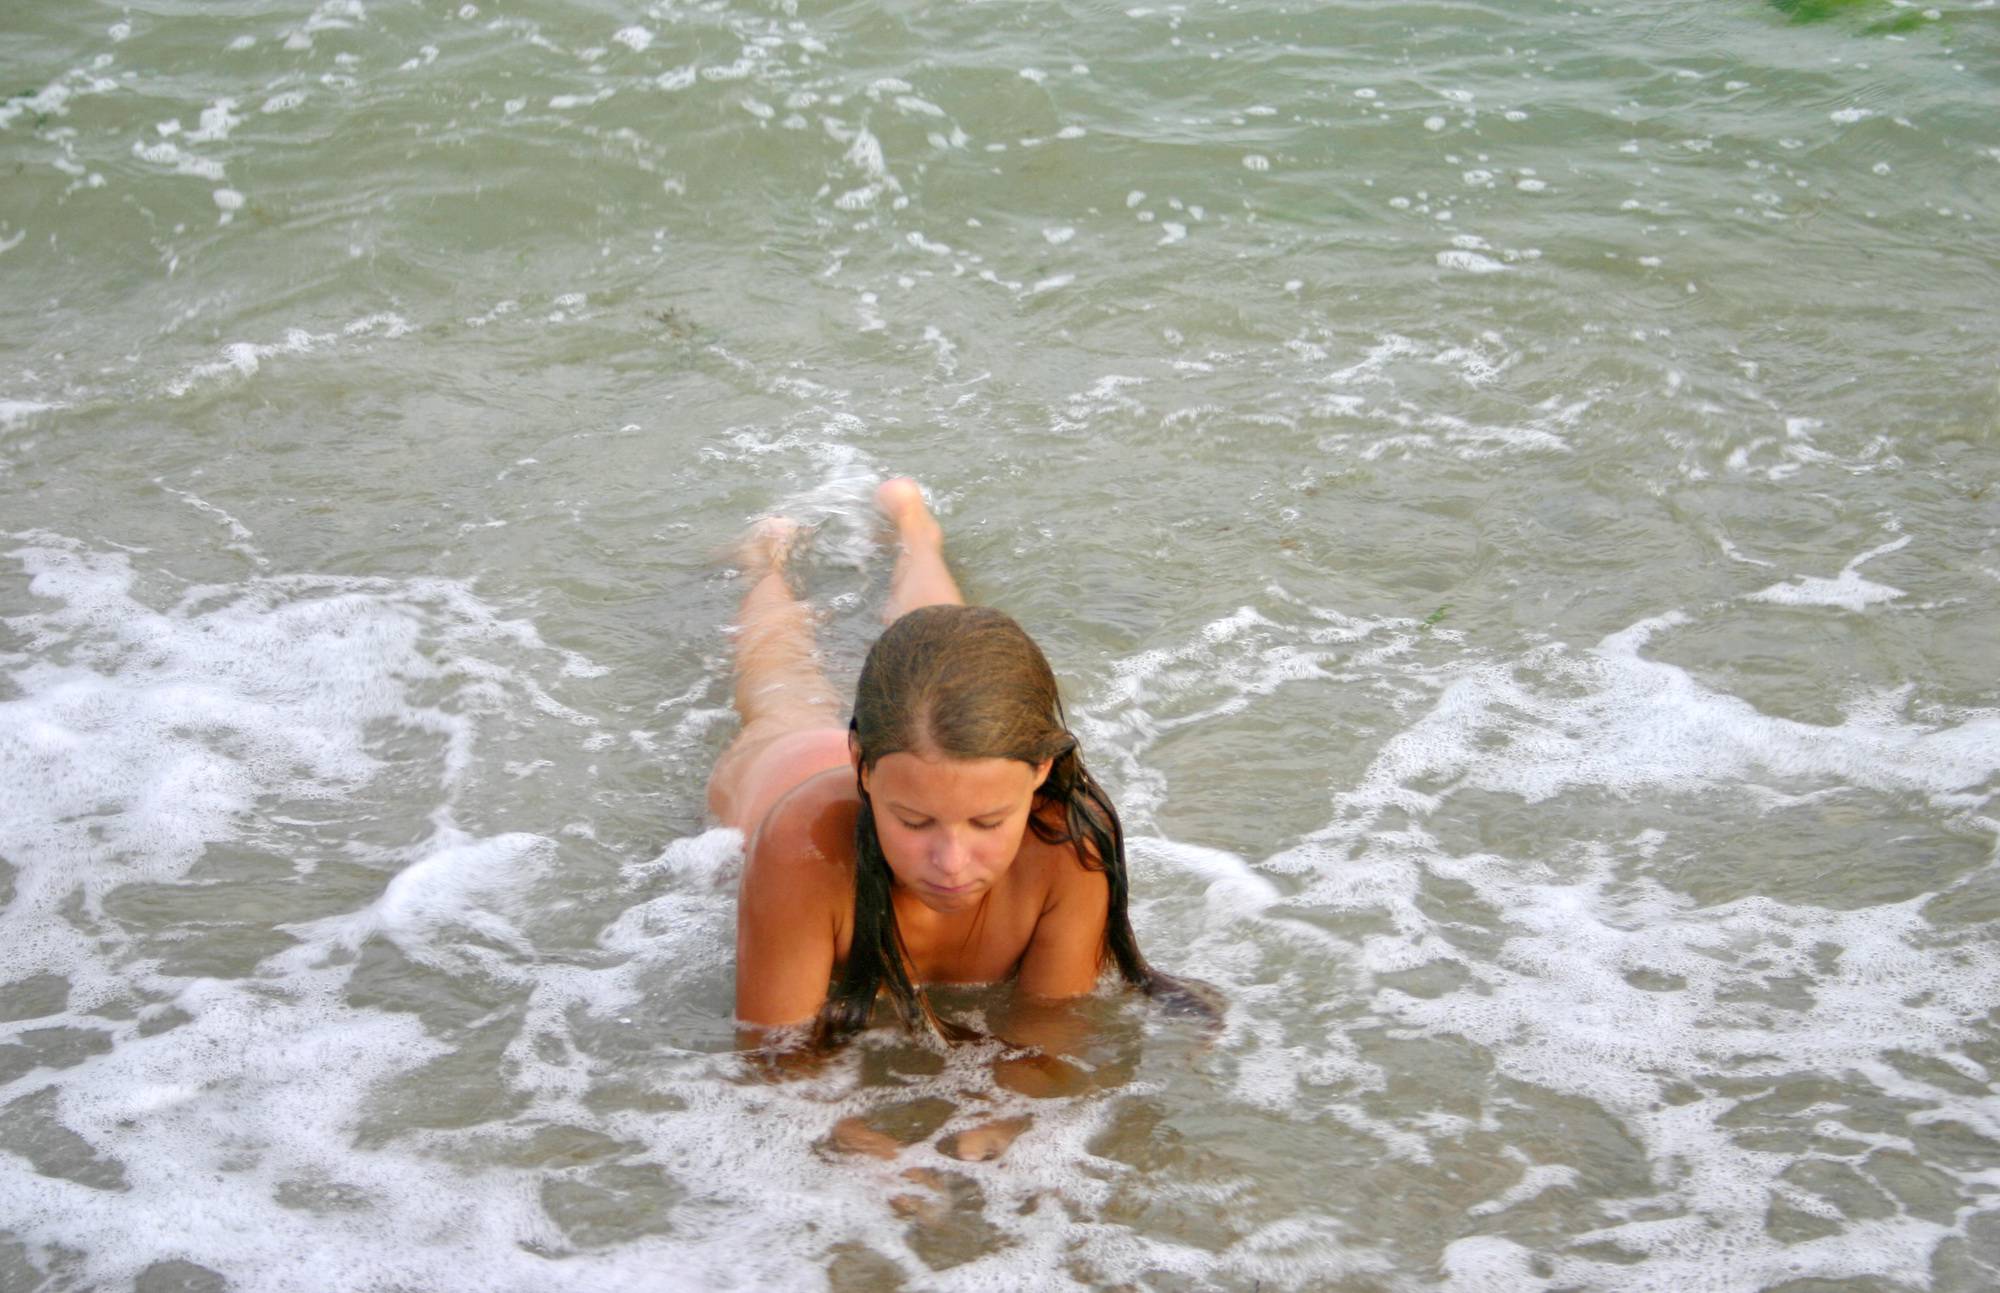 Pure Nudism Images Low Splashes in the Wave - 2